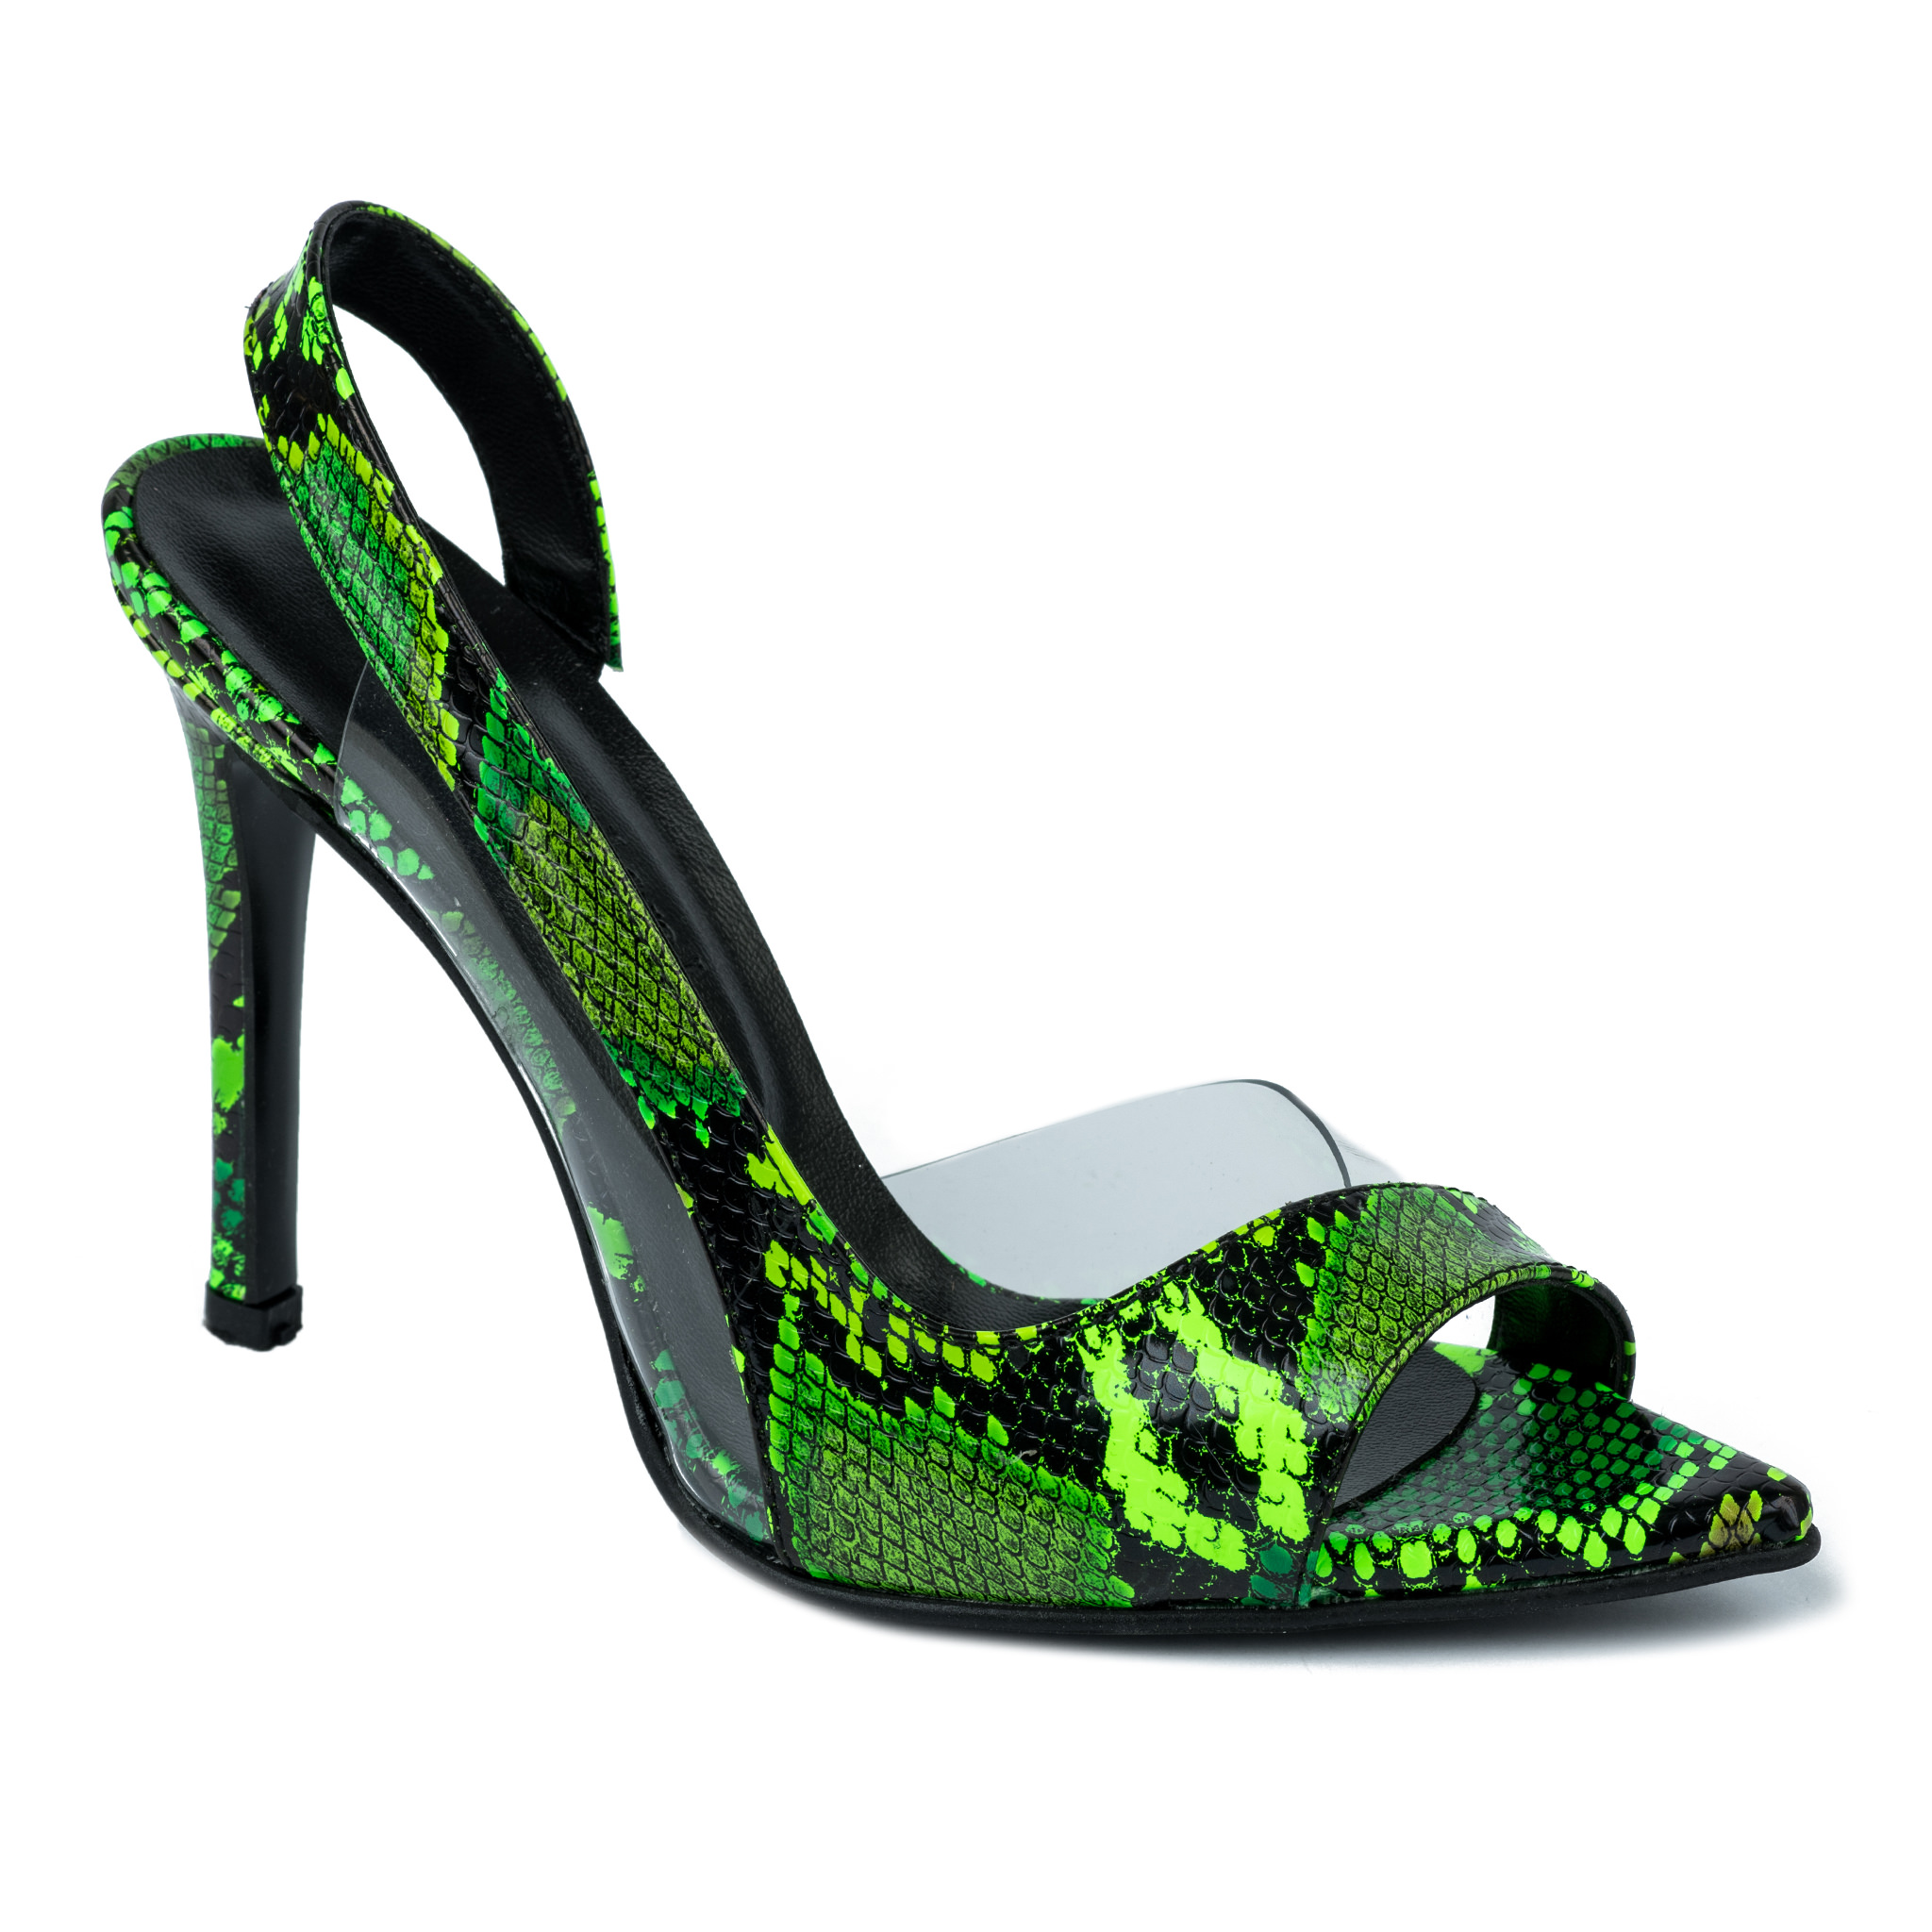 NEON SNAKE SANDALS WITH THIN HEEL - GREEN